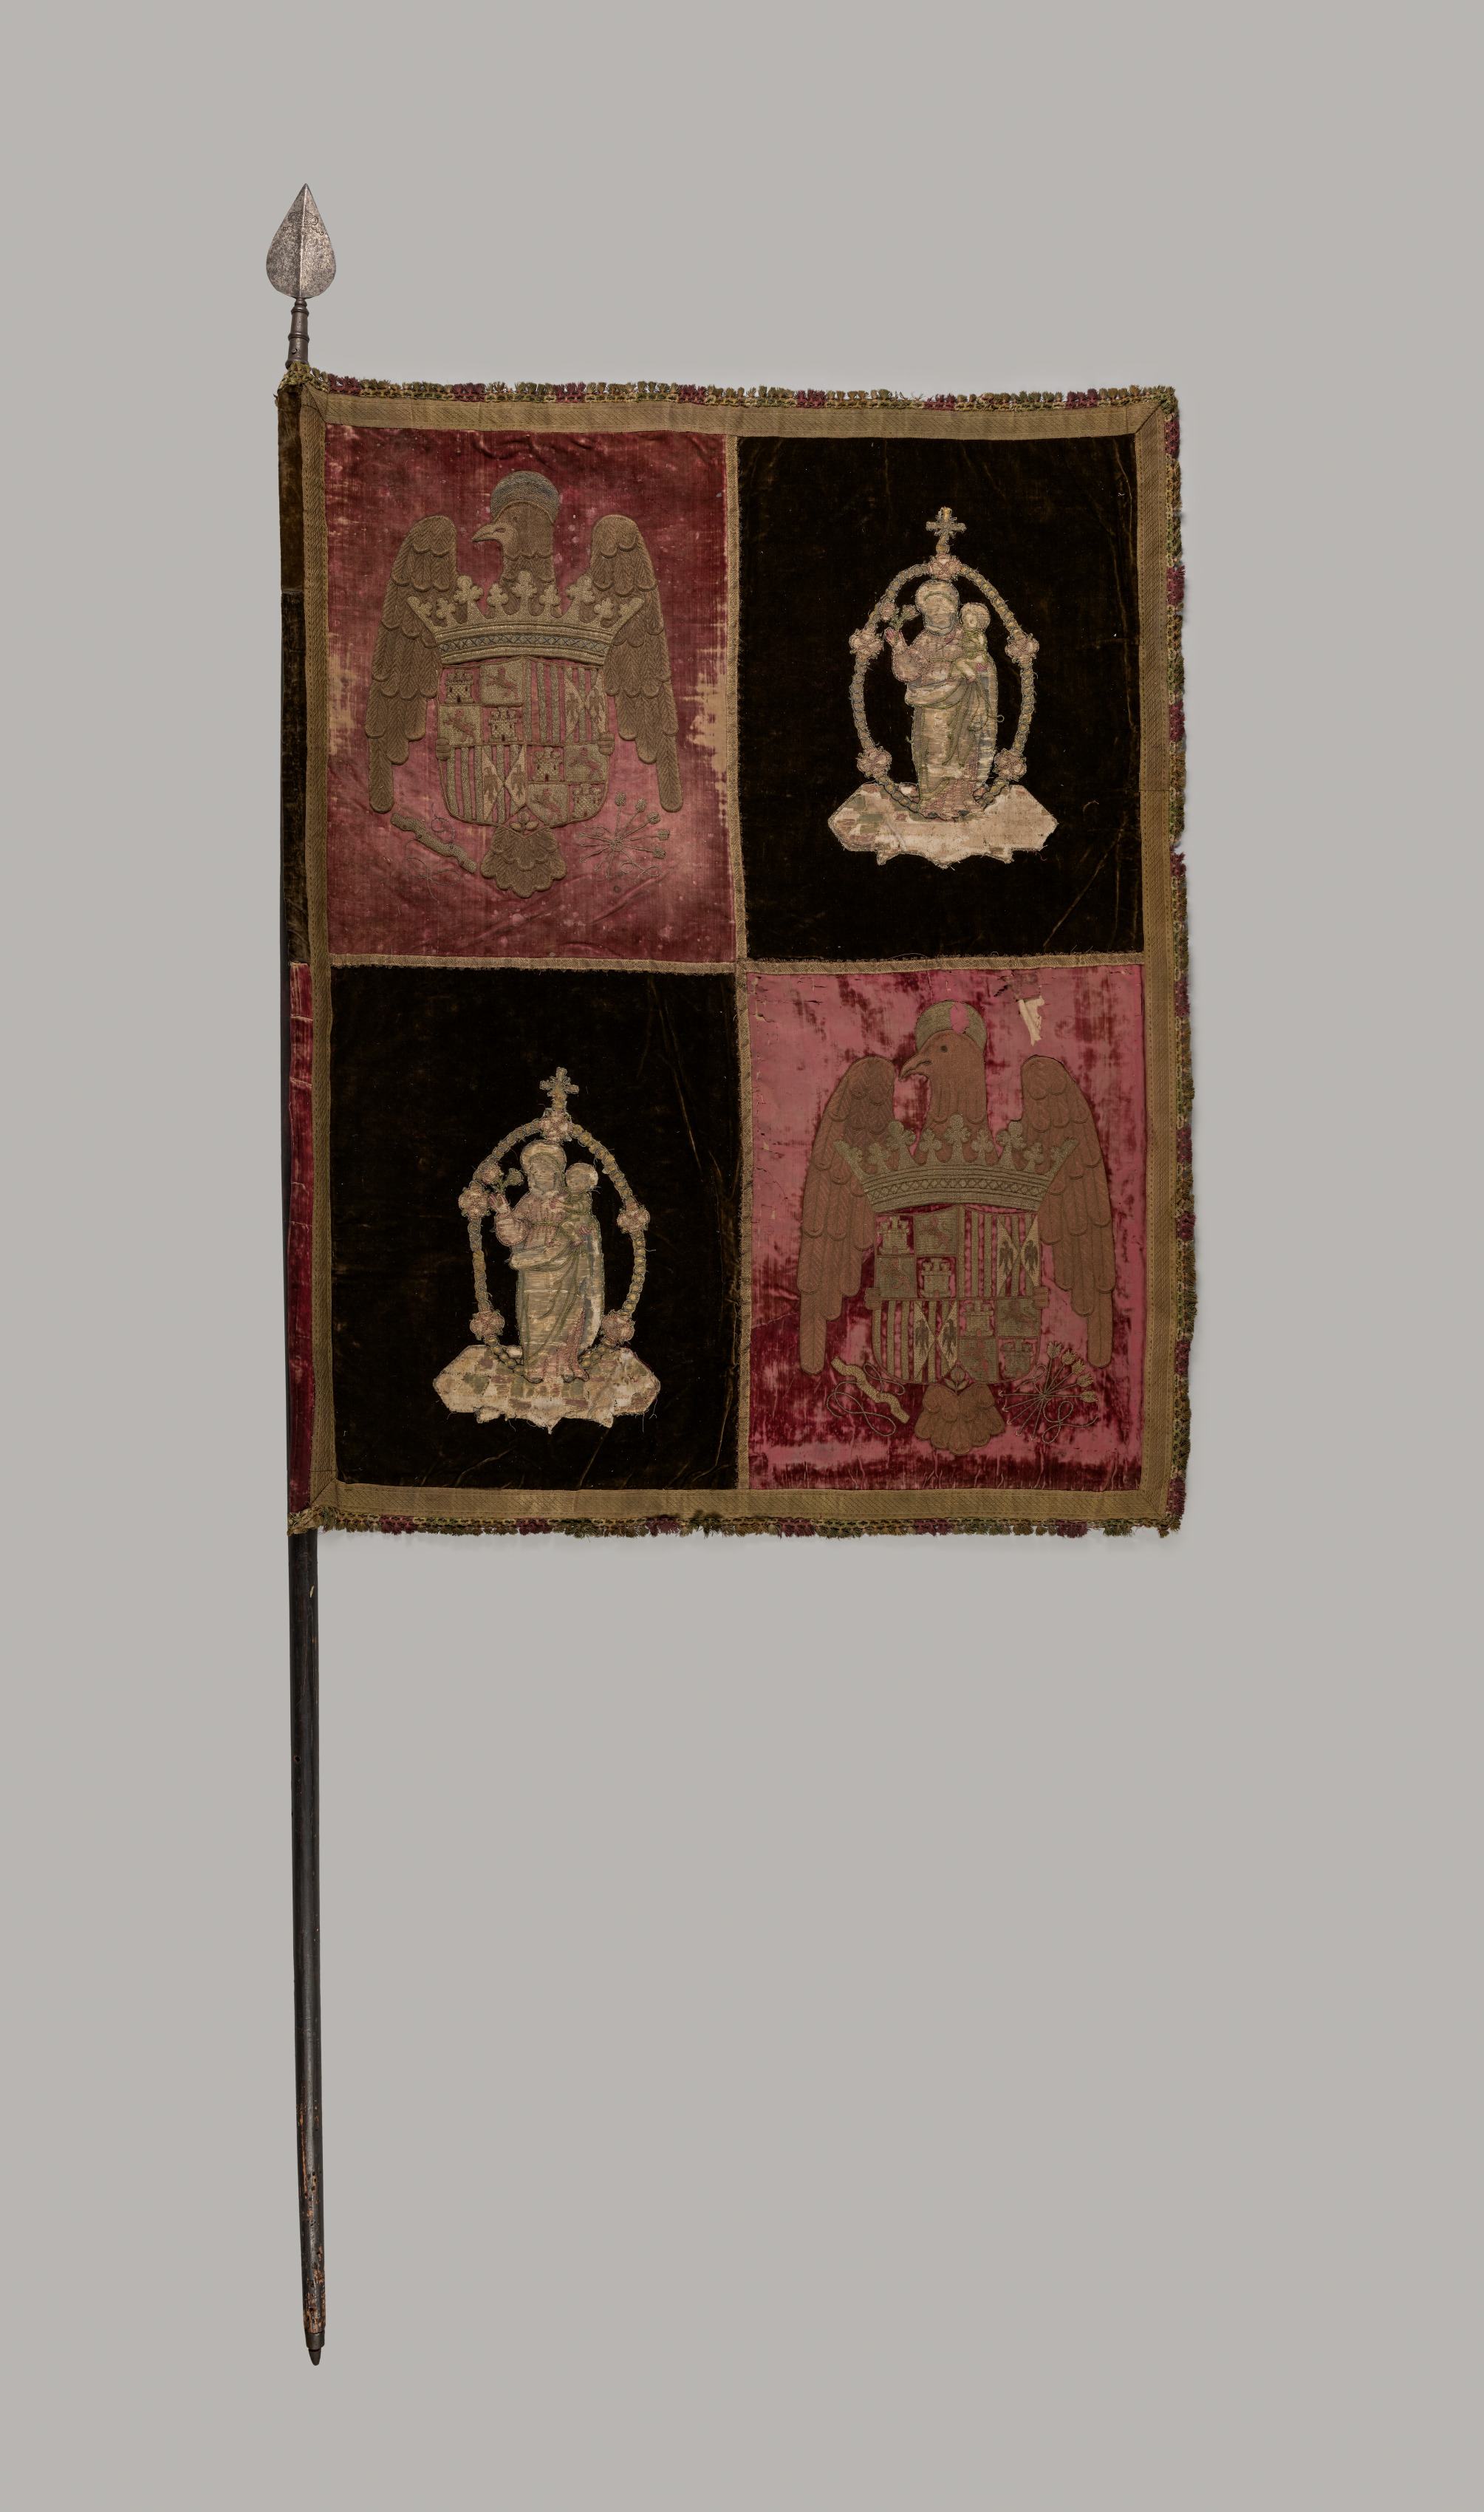 Banner with a Quartered Royal Arms of Spain and the Madonna and Child